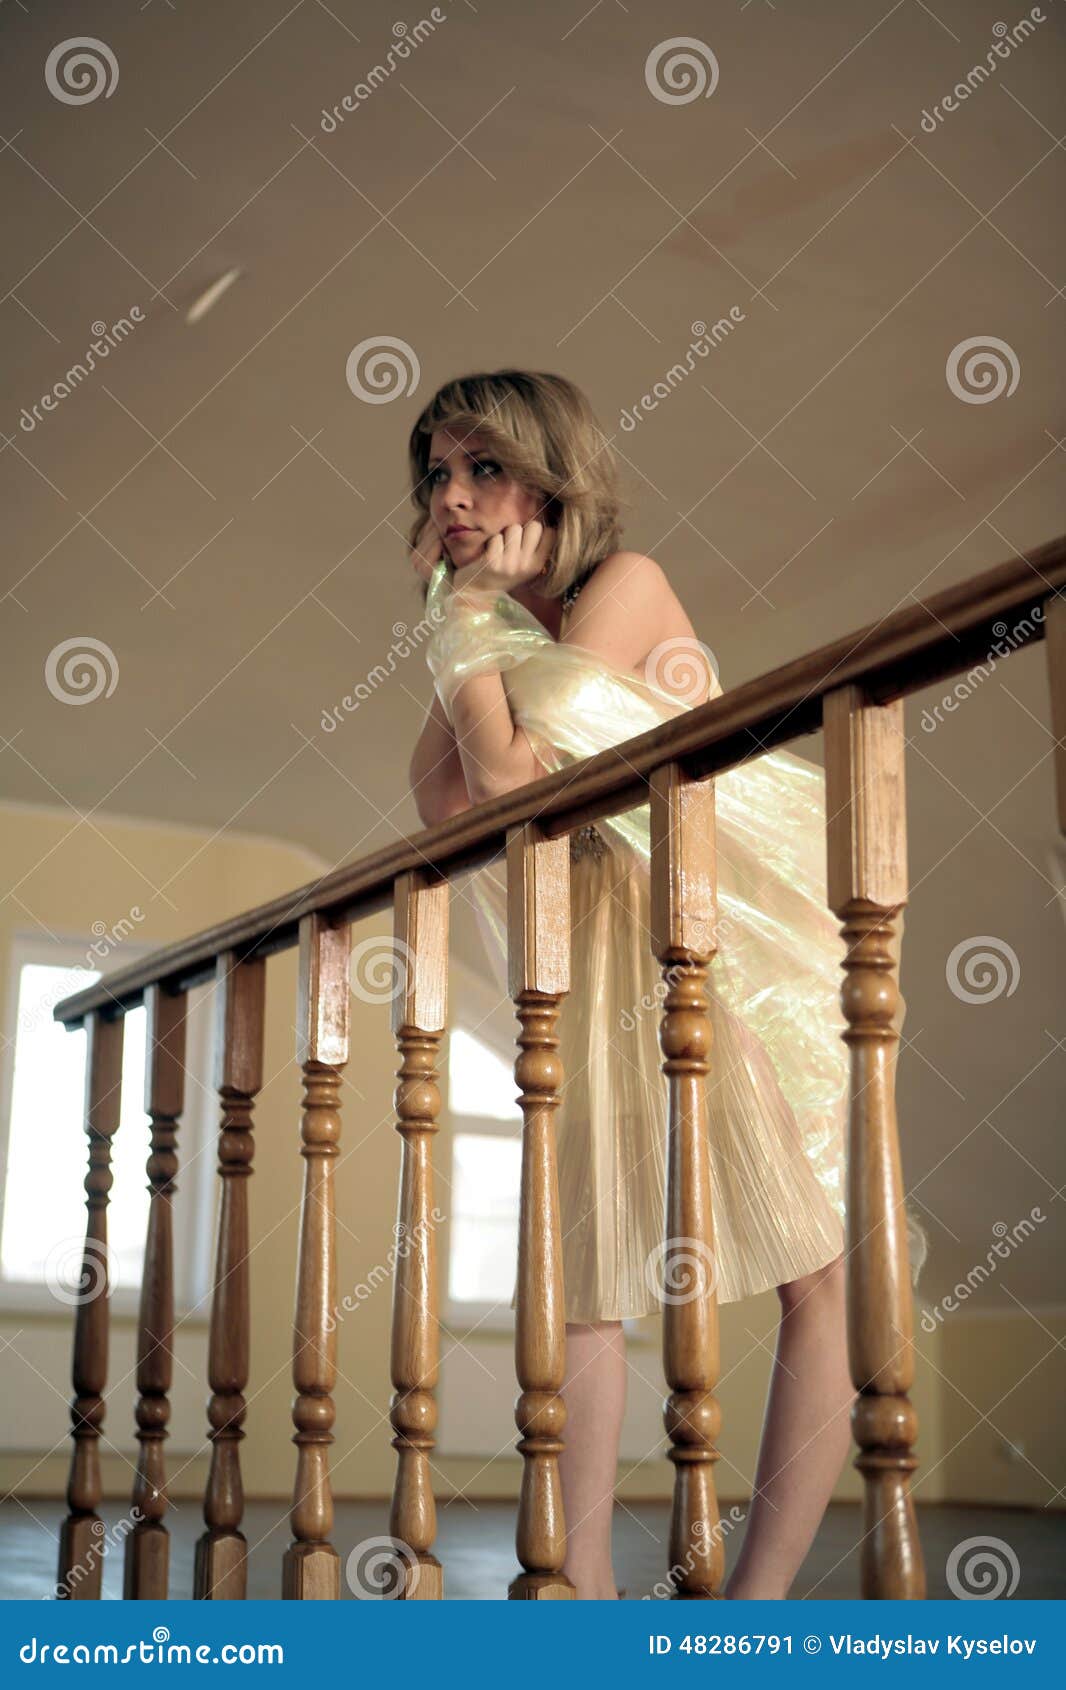 Young Girl Based On Carved Wooden Railing Stock Image Image Of Dreamy Dress 48286791 4731